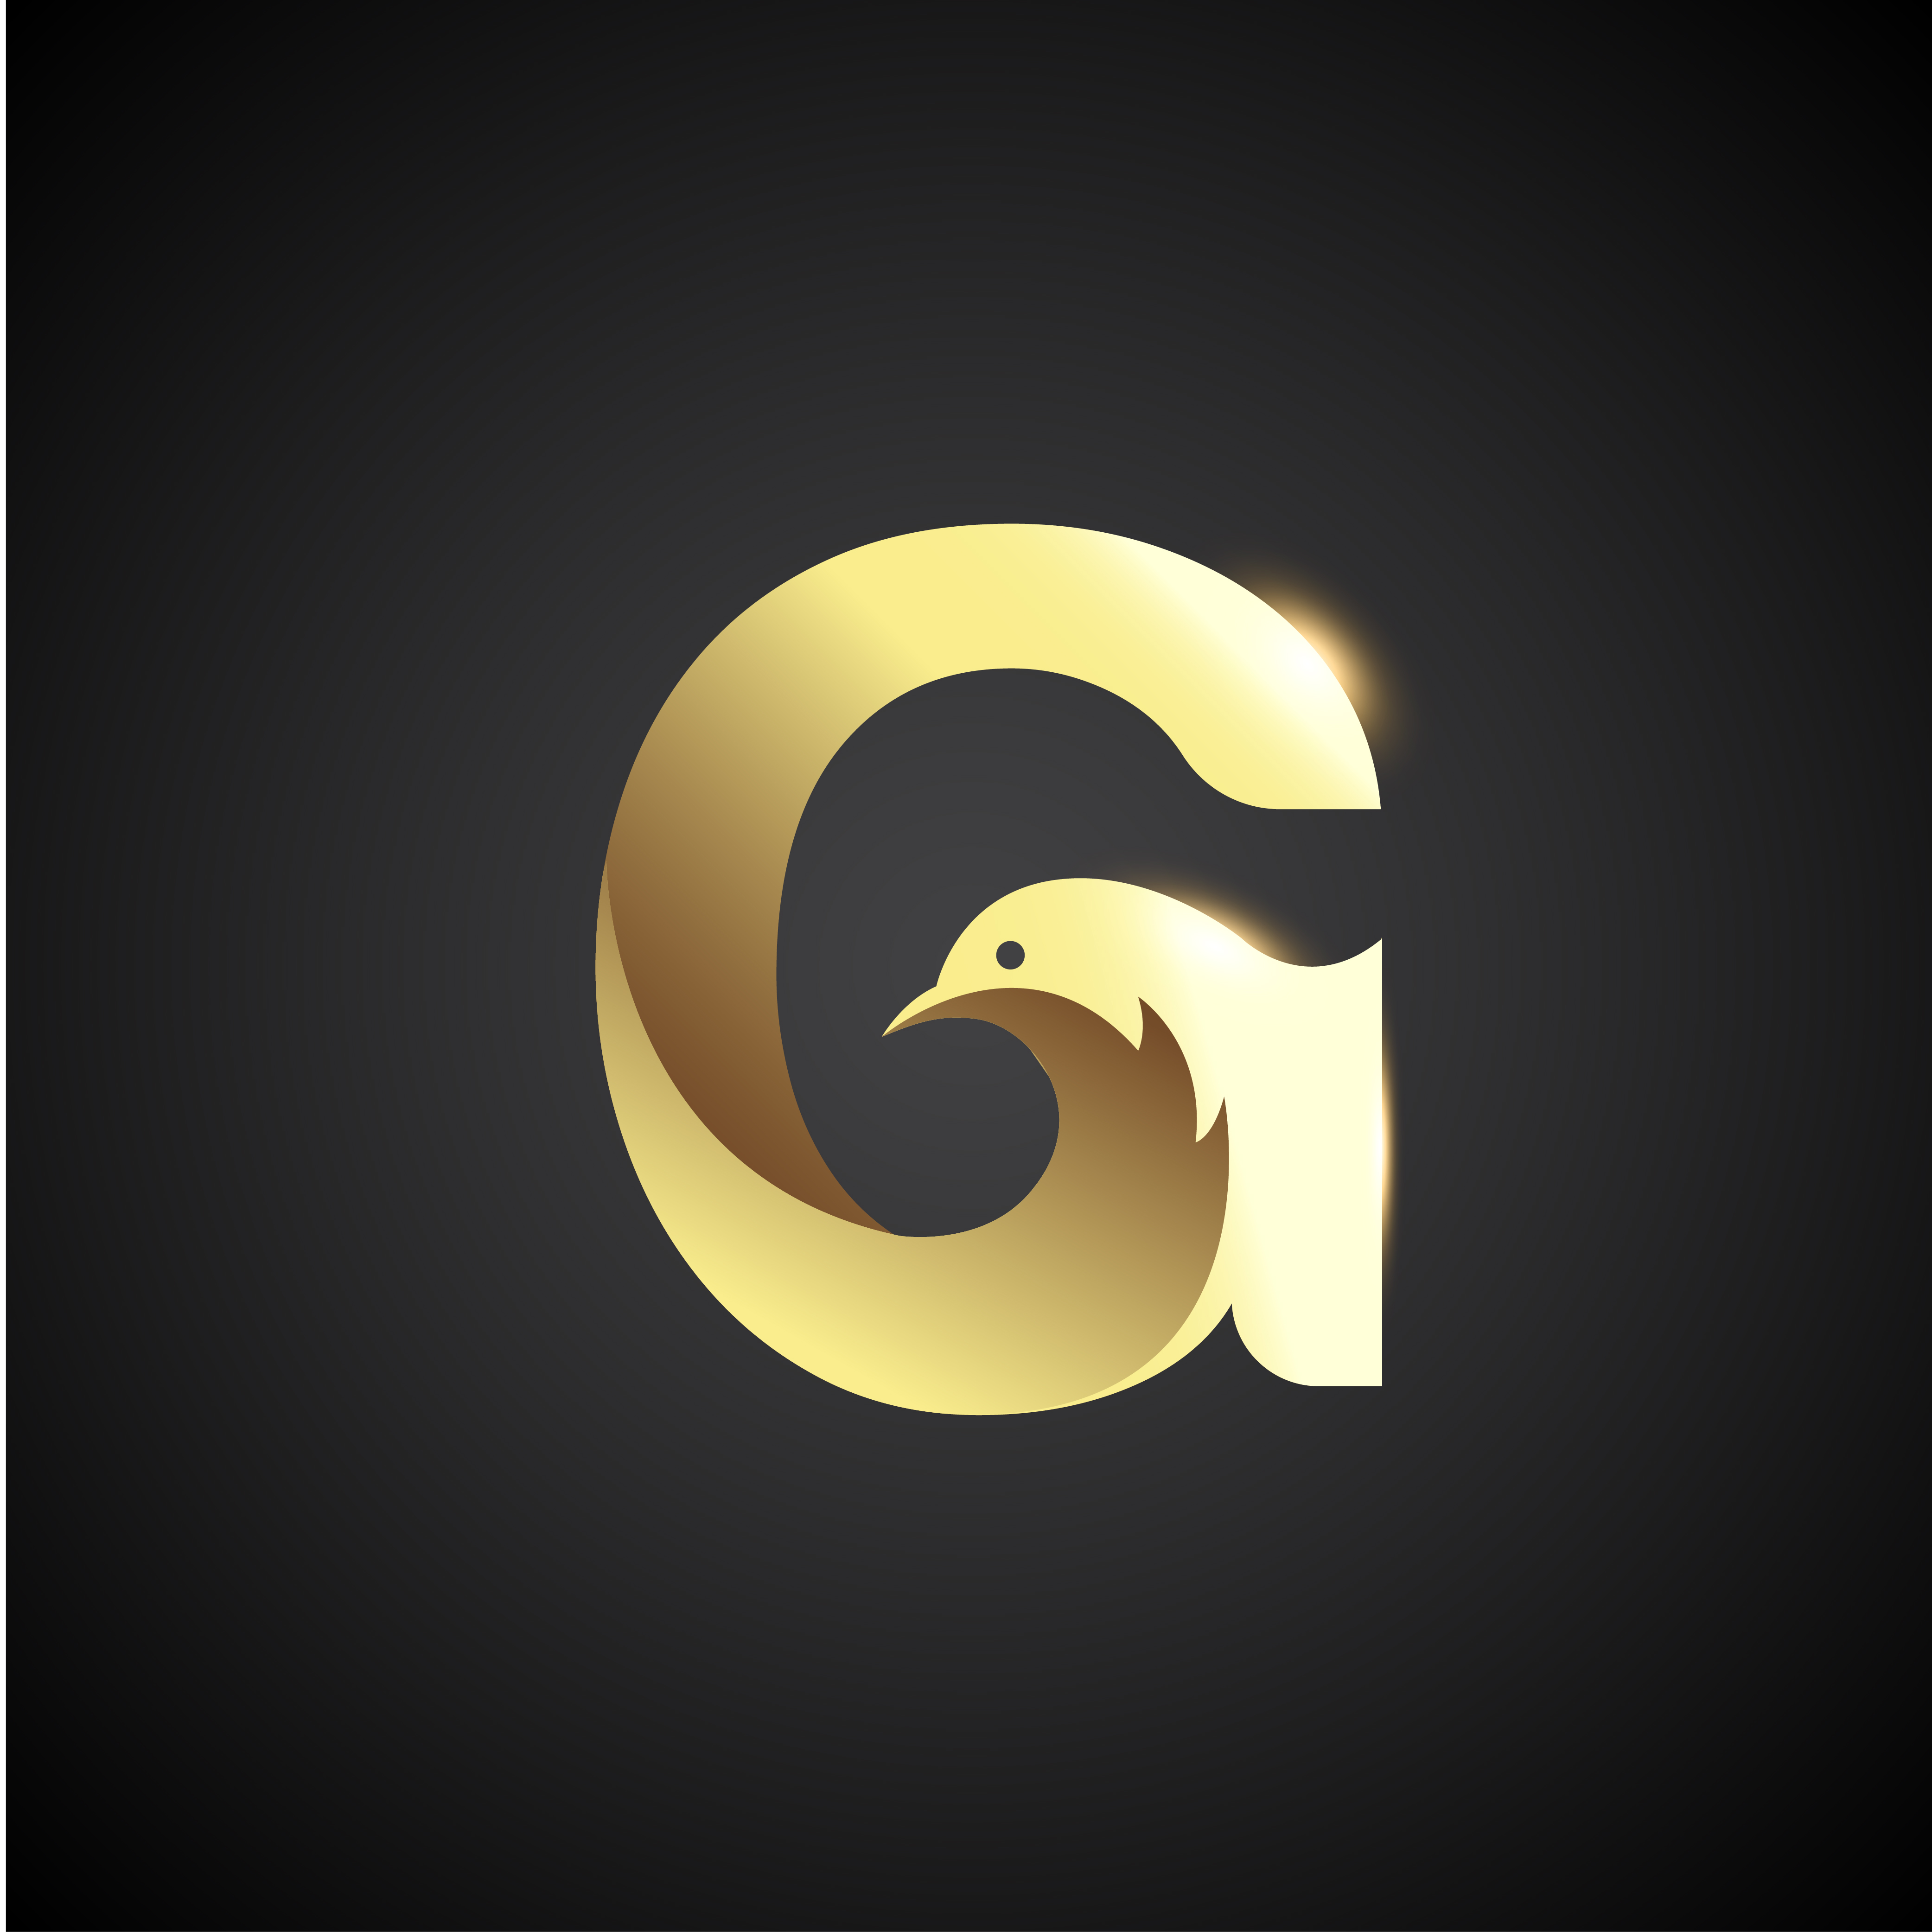 Gold Letter G With Dove Logo Concept - Download Free ...